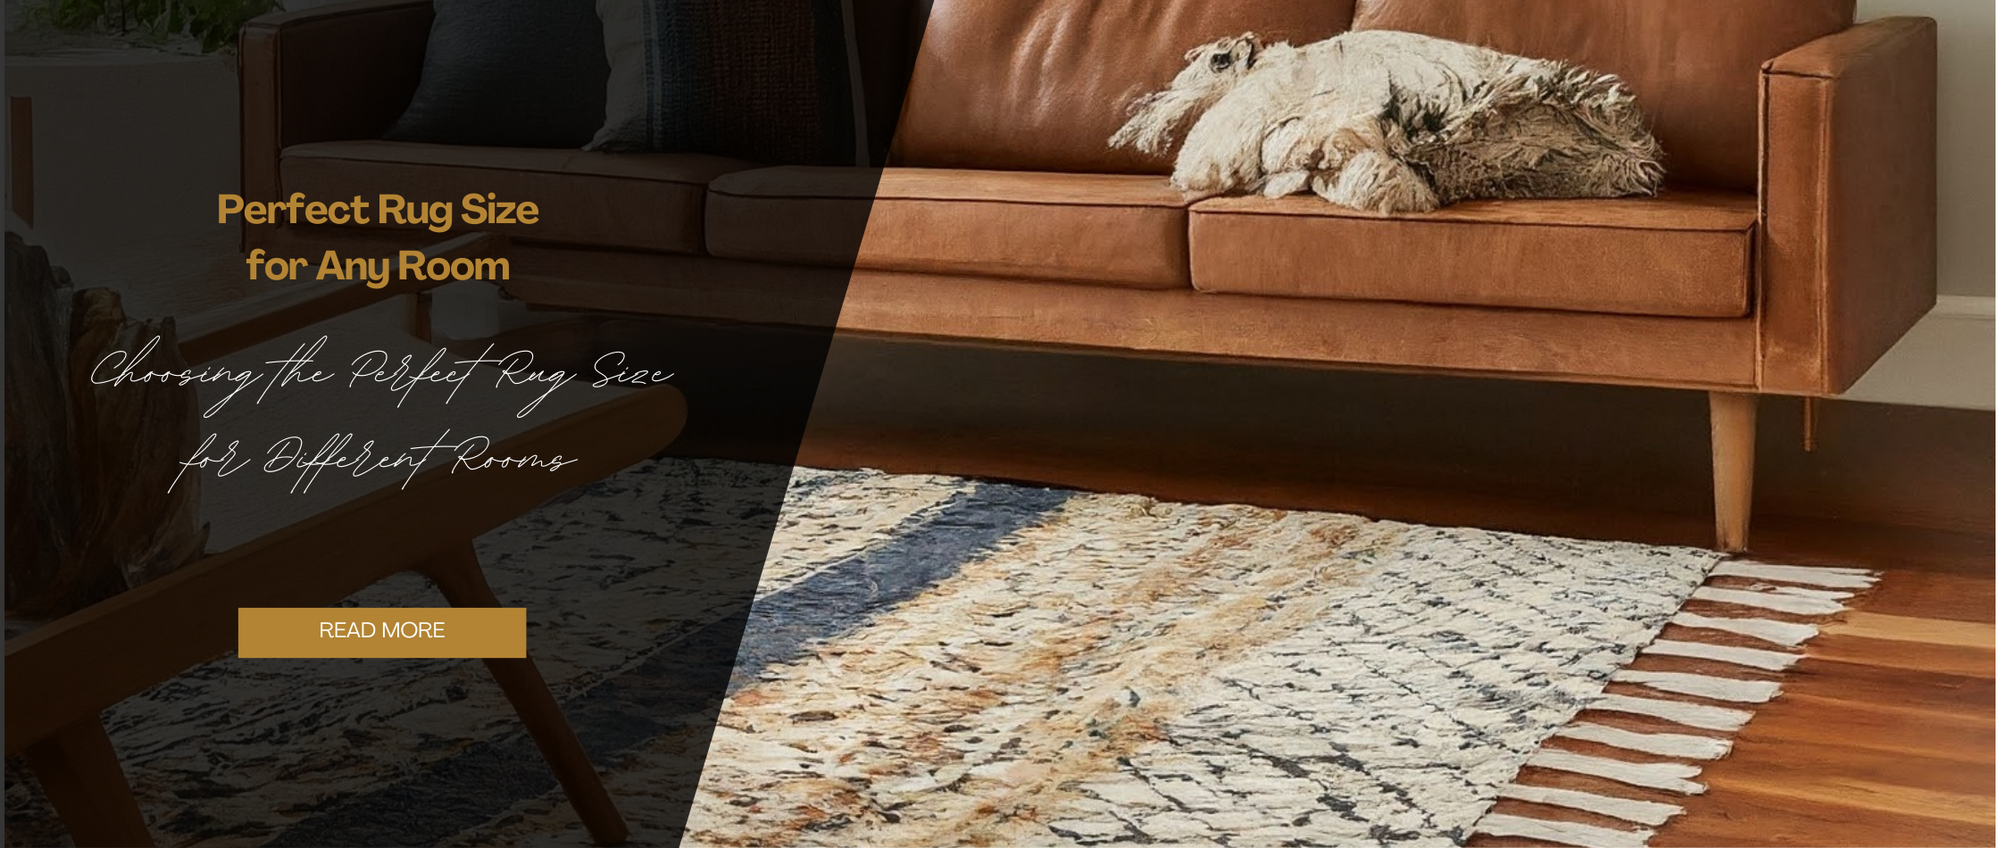 Find the Perfect Rug Size for Any Room in New Zealand